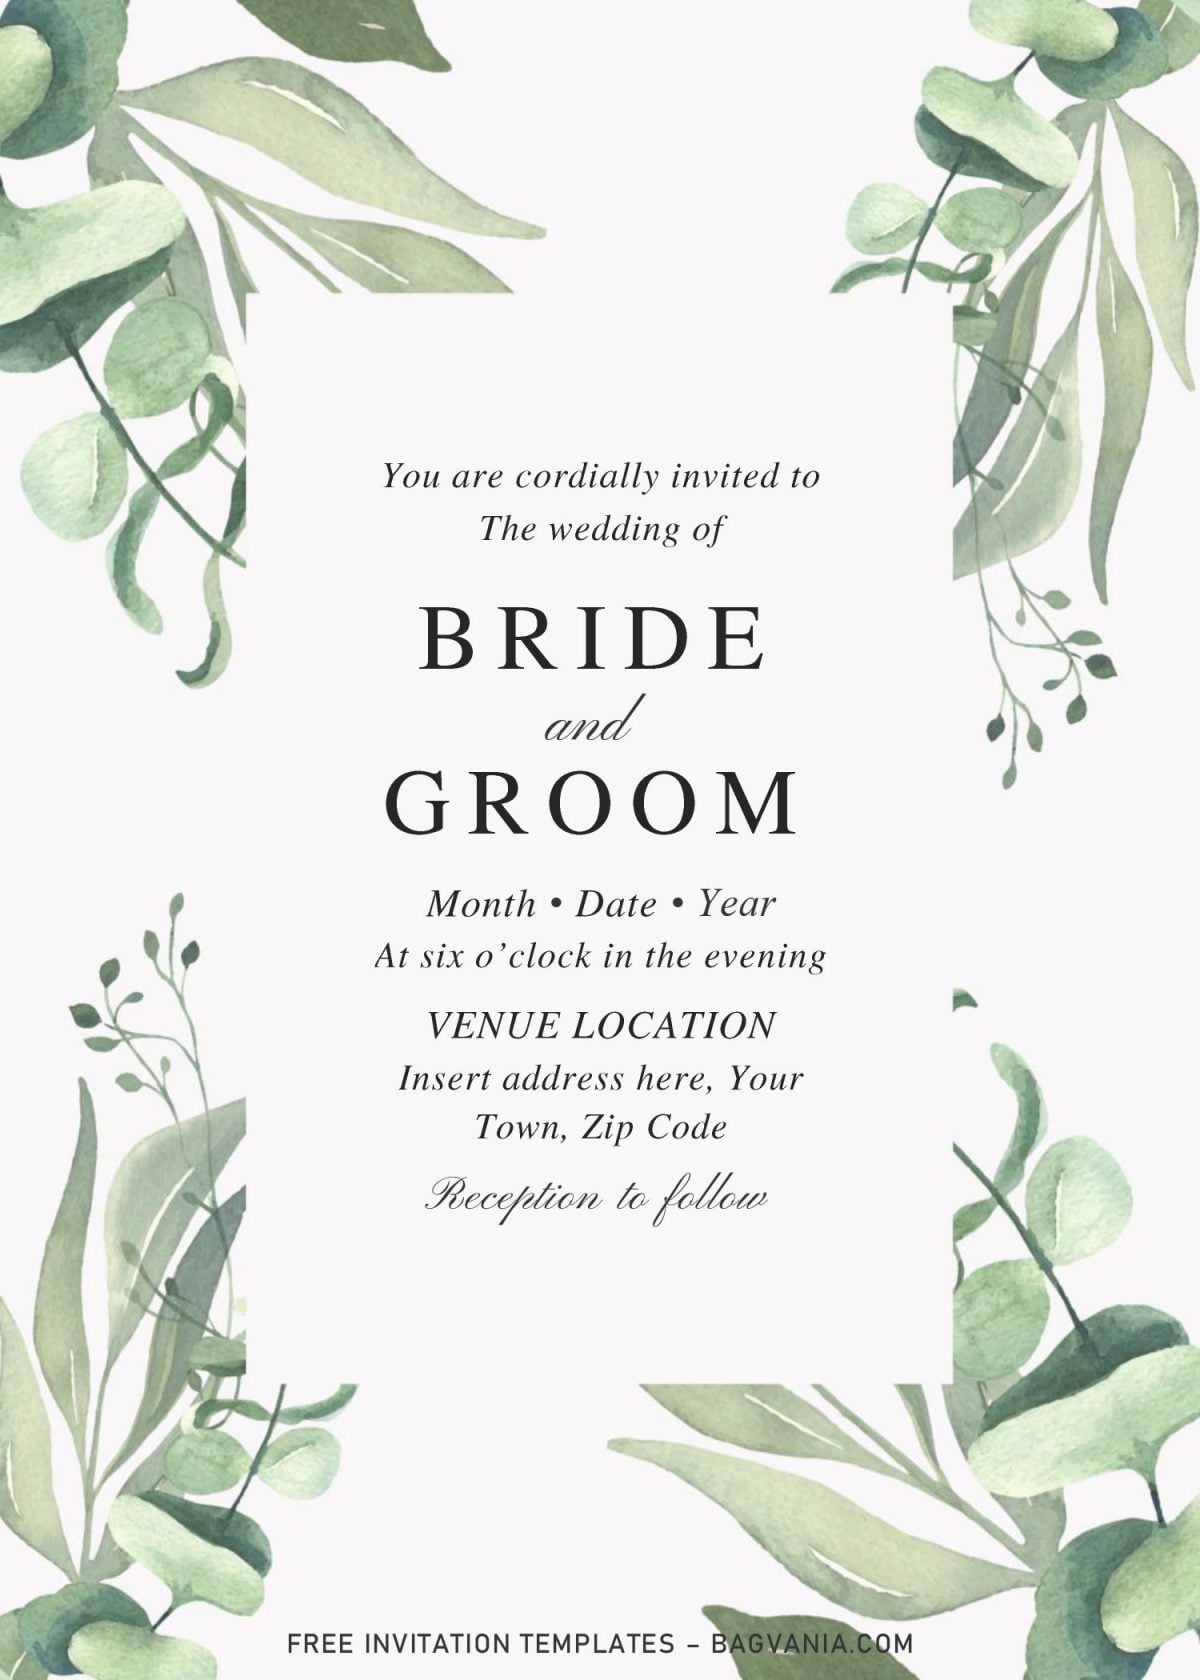 Free Botanical Leaves Wedding Invitation Templates For Word and has aesthetic green leaves border